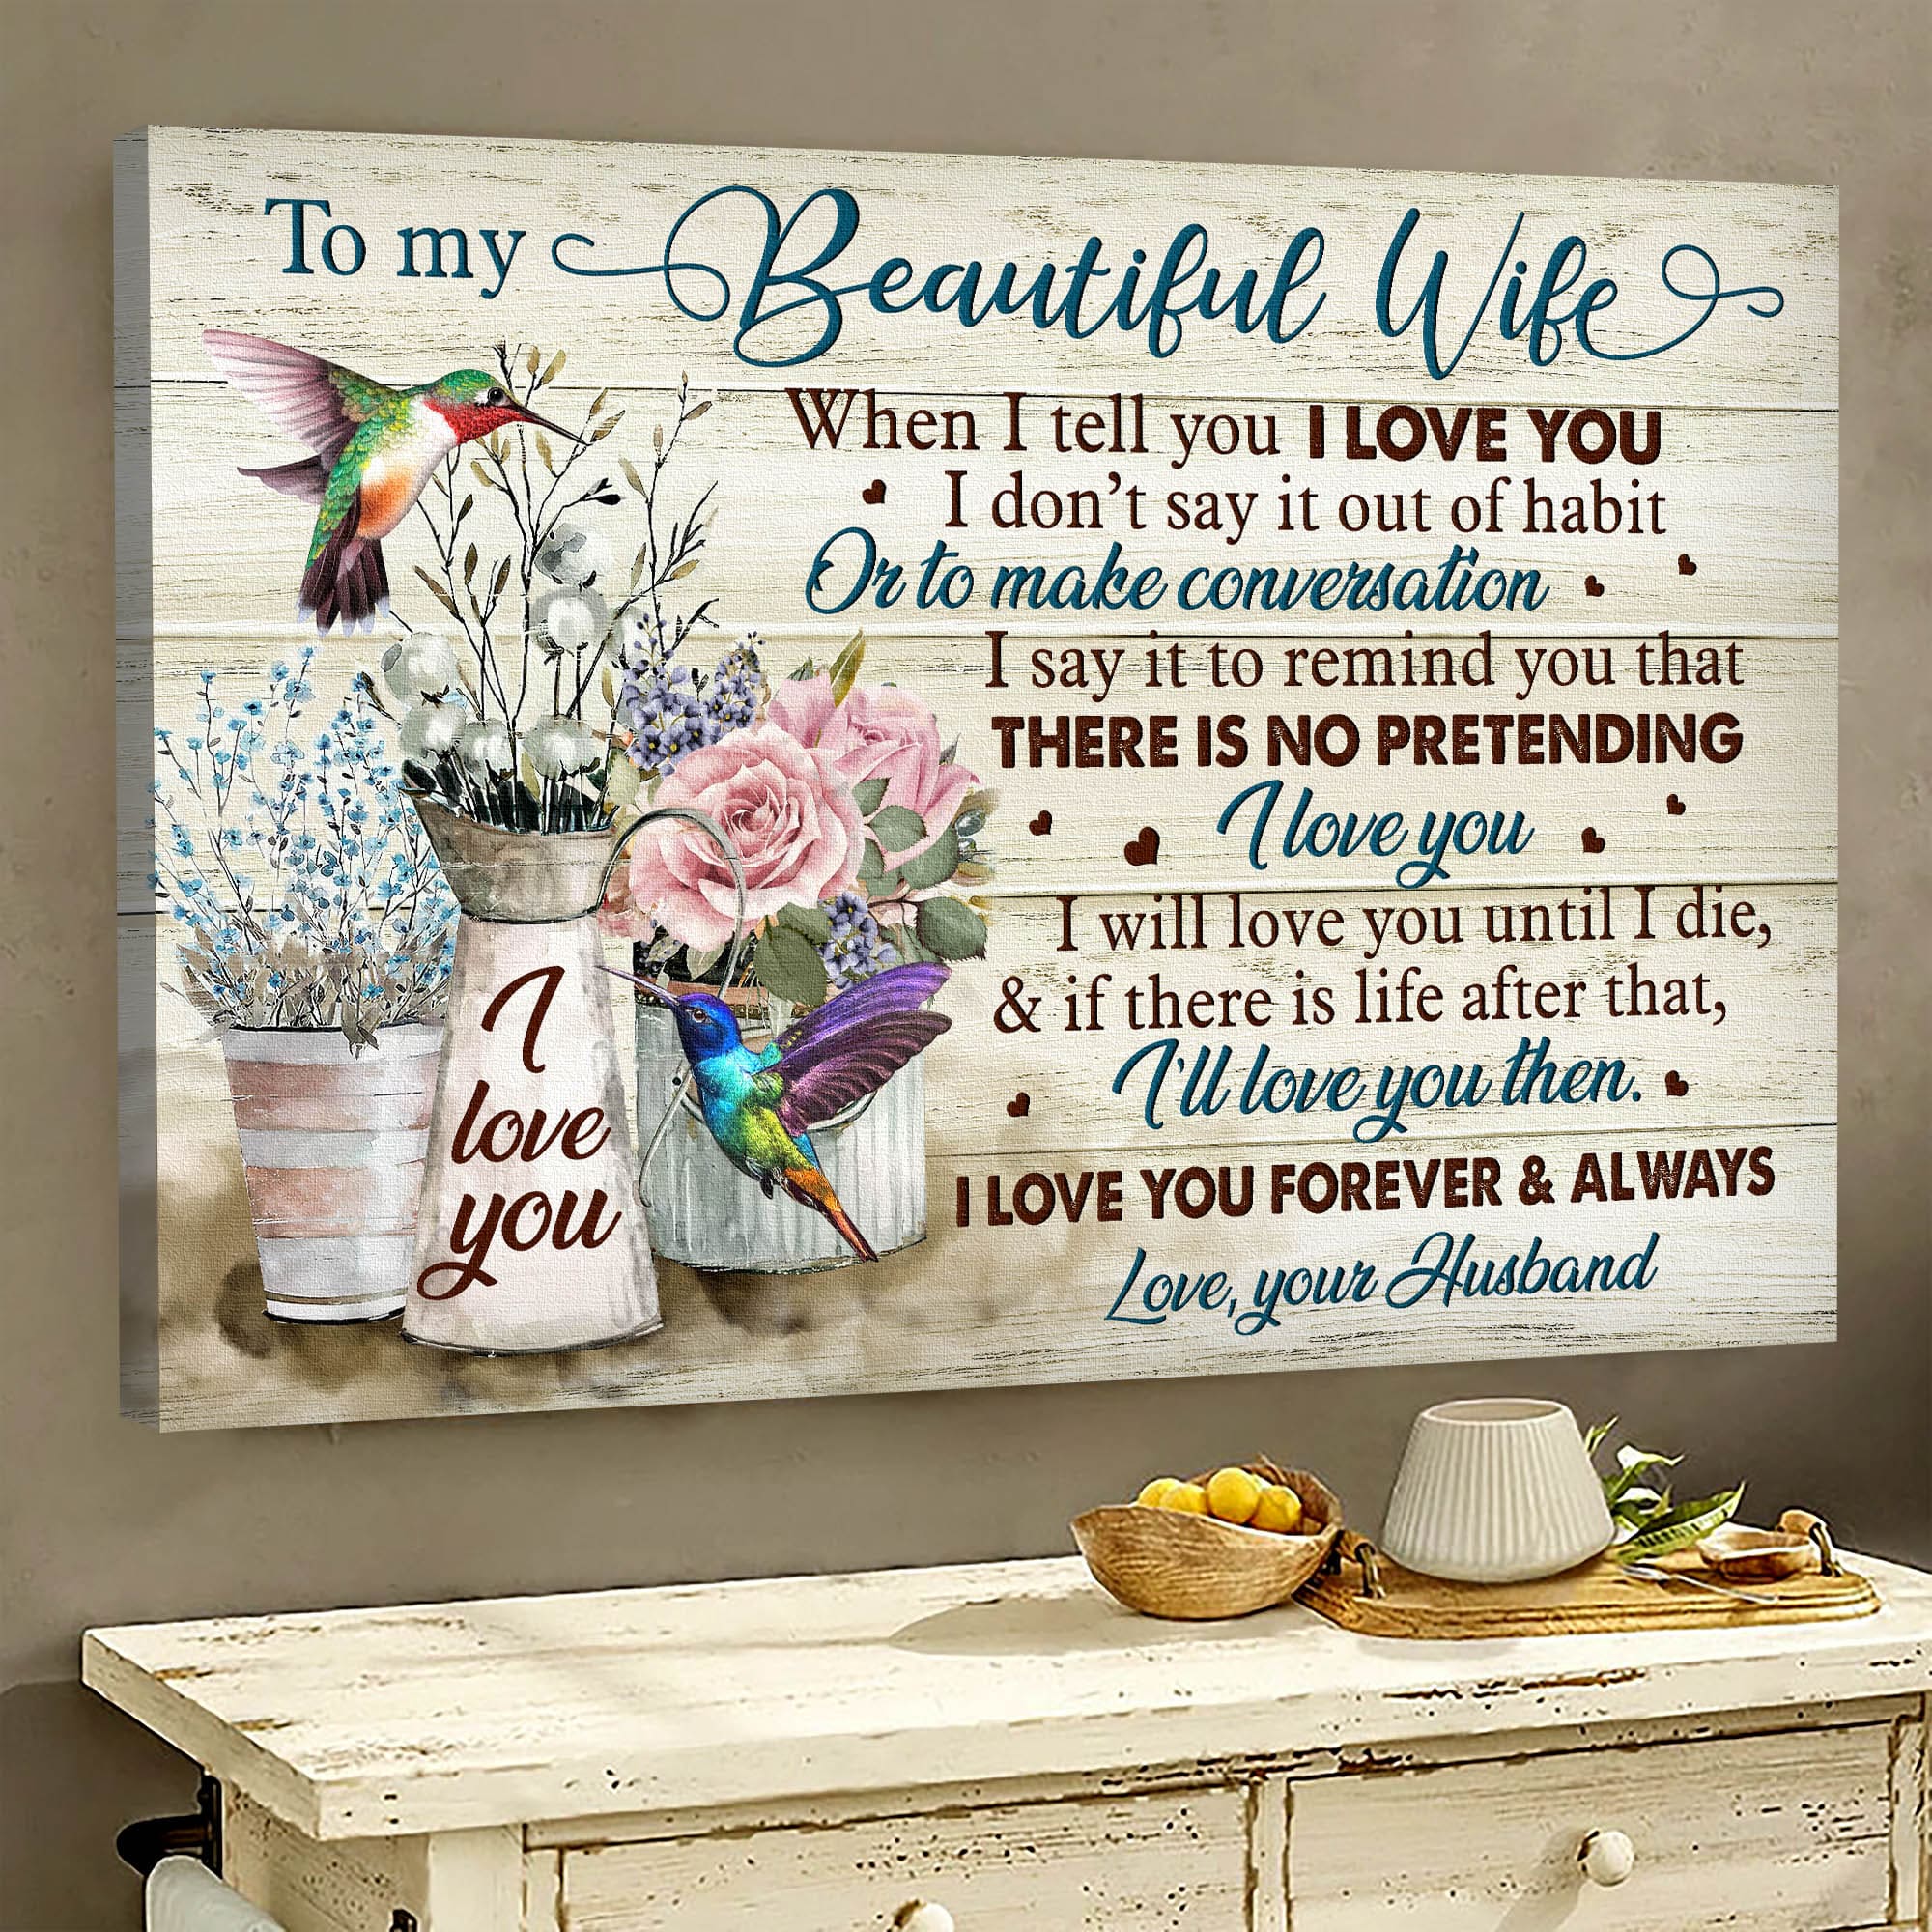 To my wife, Baby flower, Rose drawing, I will love you until I die - Couple Landscape Canvas Prints, Wall Art